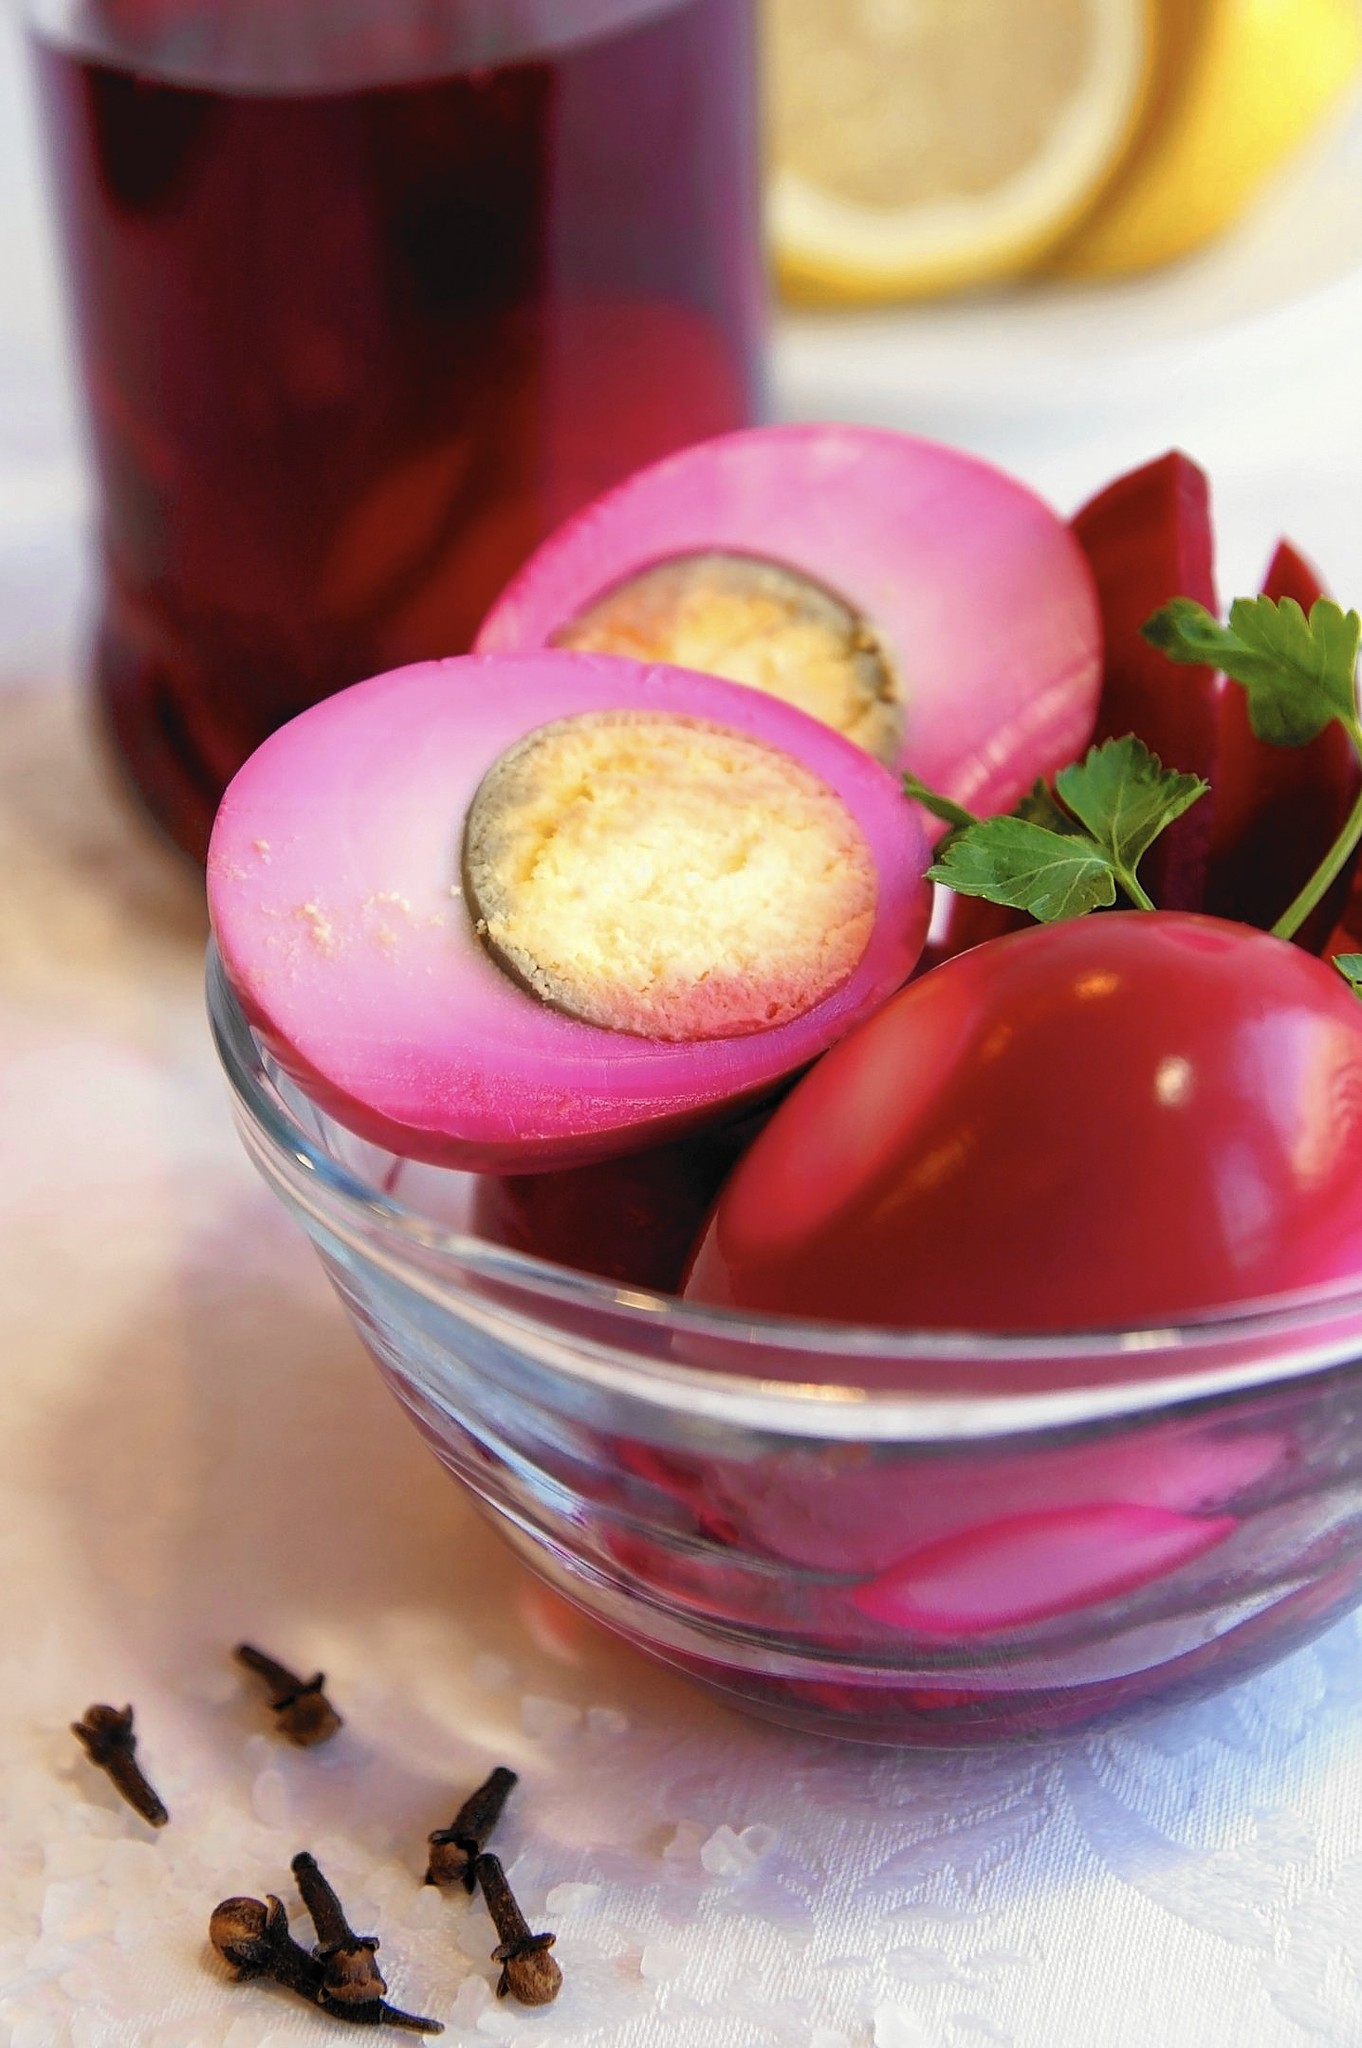 Do you make pickled beet eggs at home? - The Morning Call